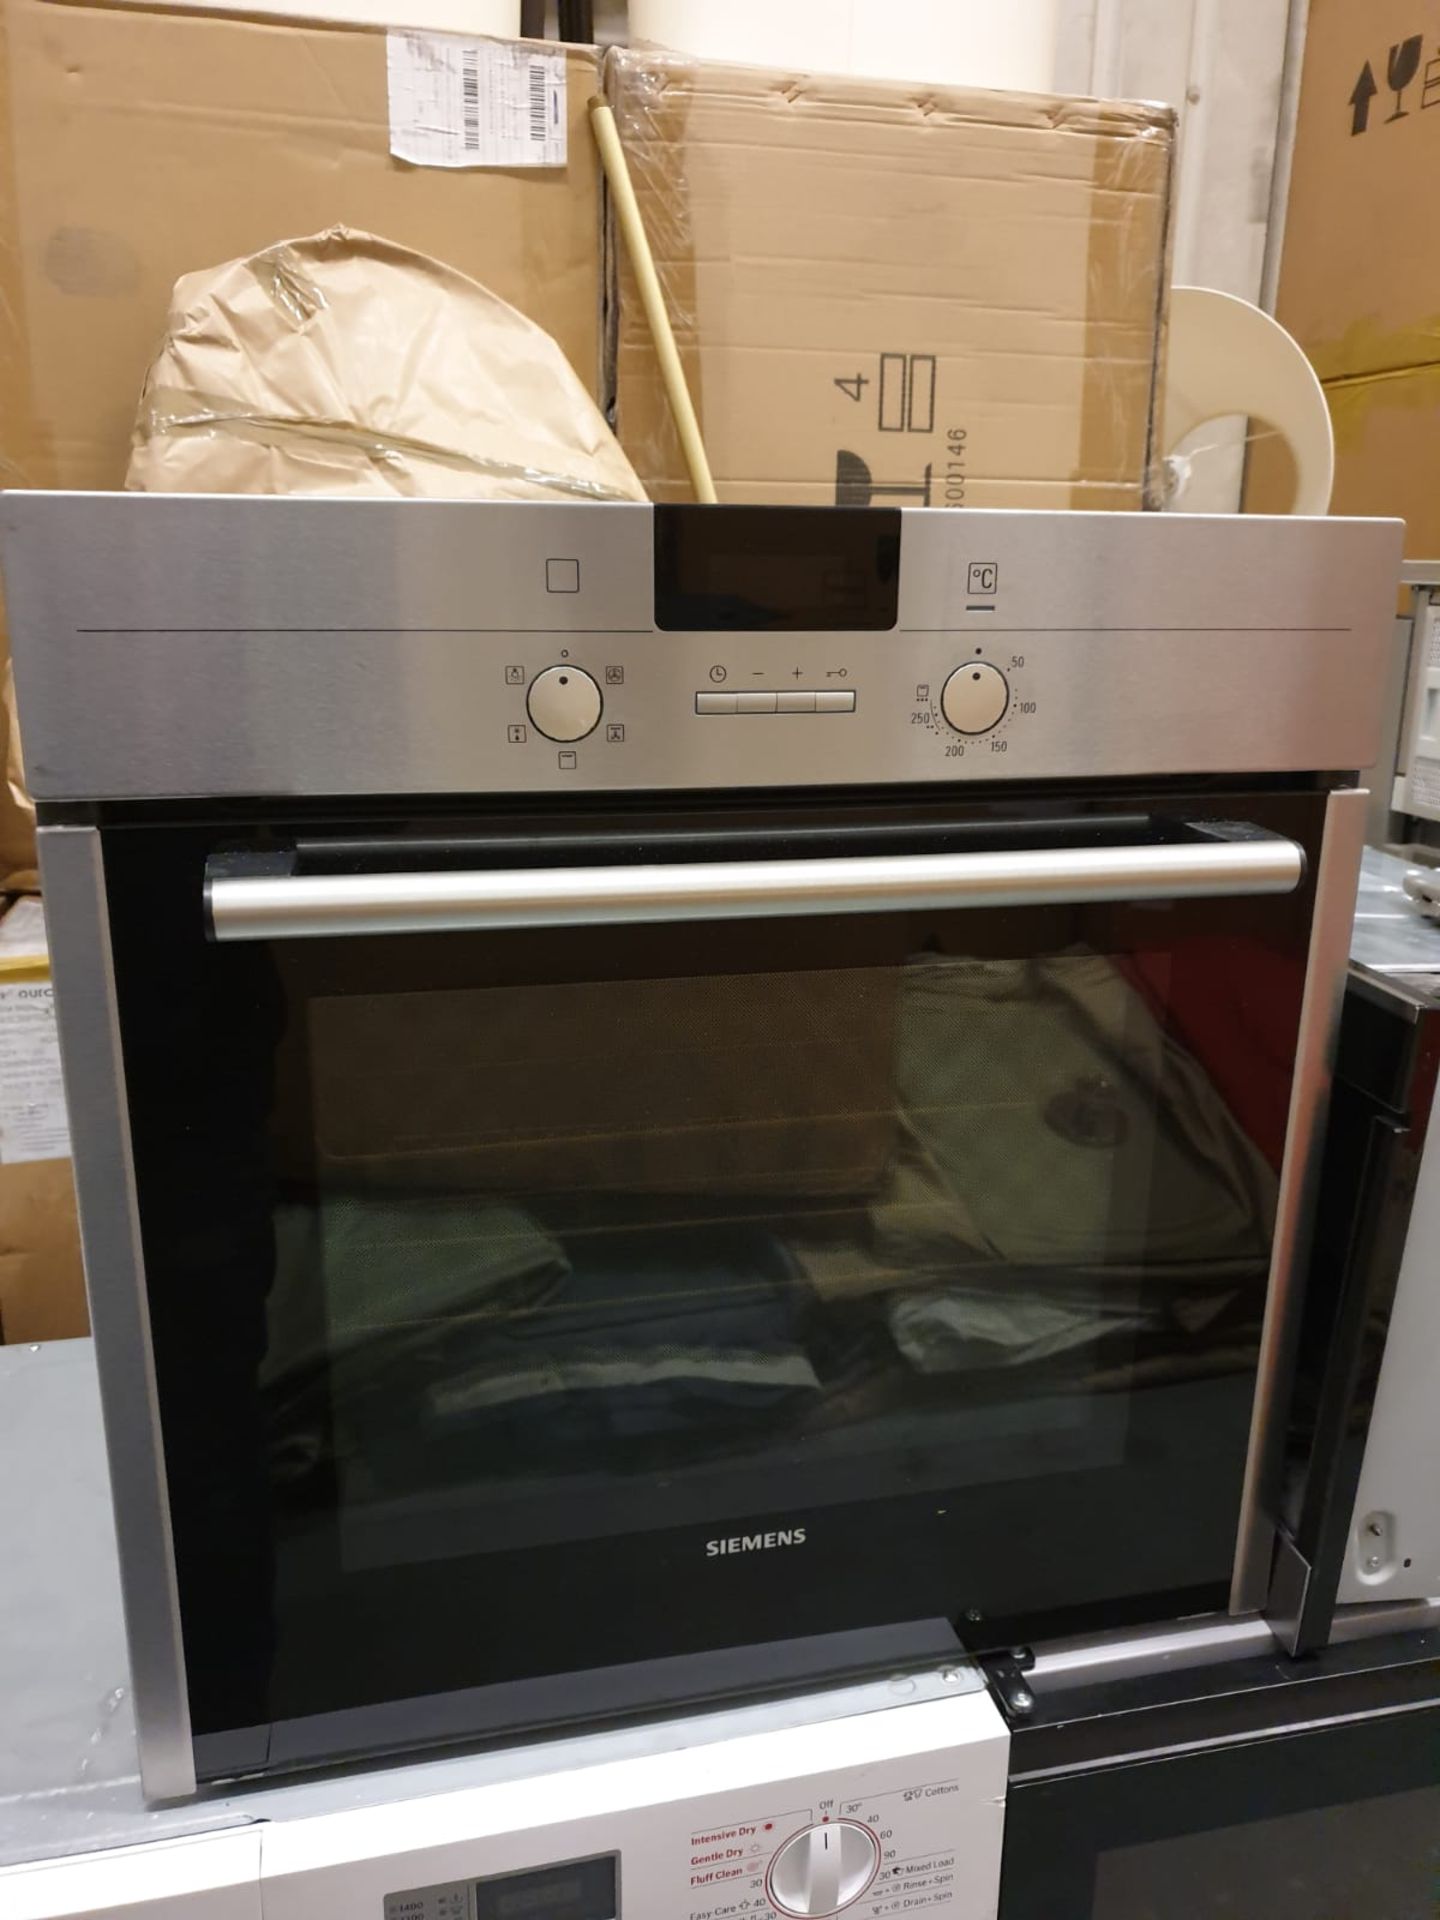 Siemens HB13AB523B Iq100 Electric Built-In Single Oven (13AB52384871136)